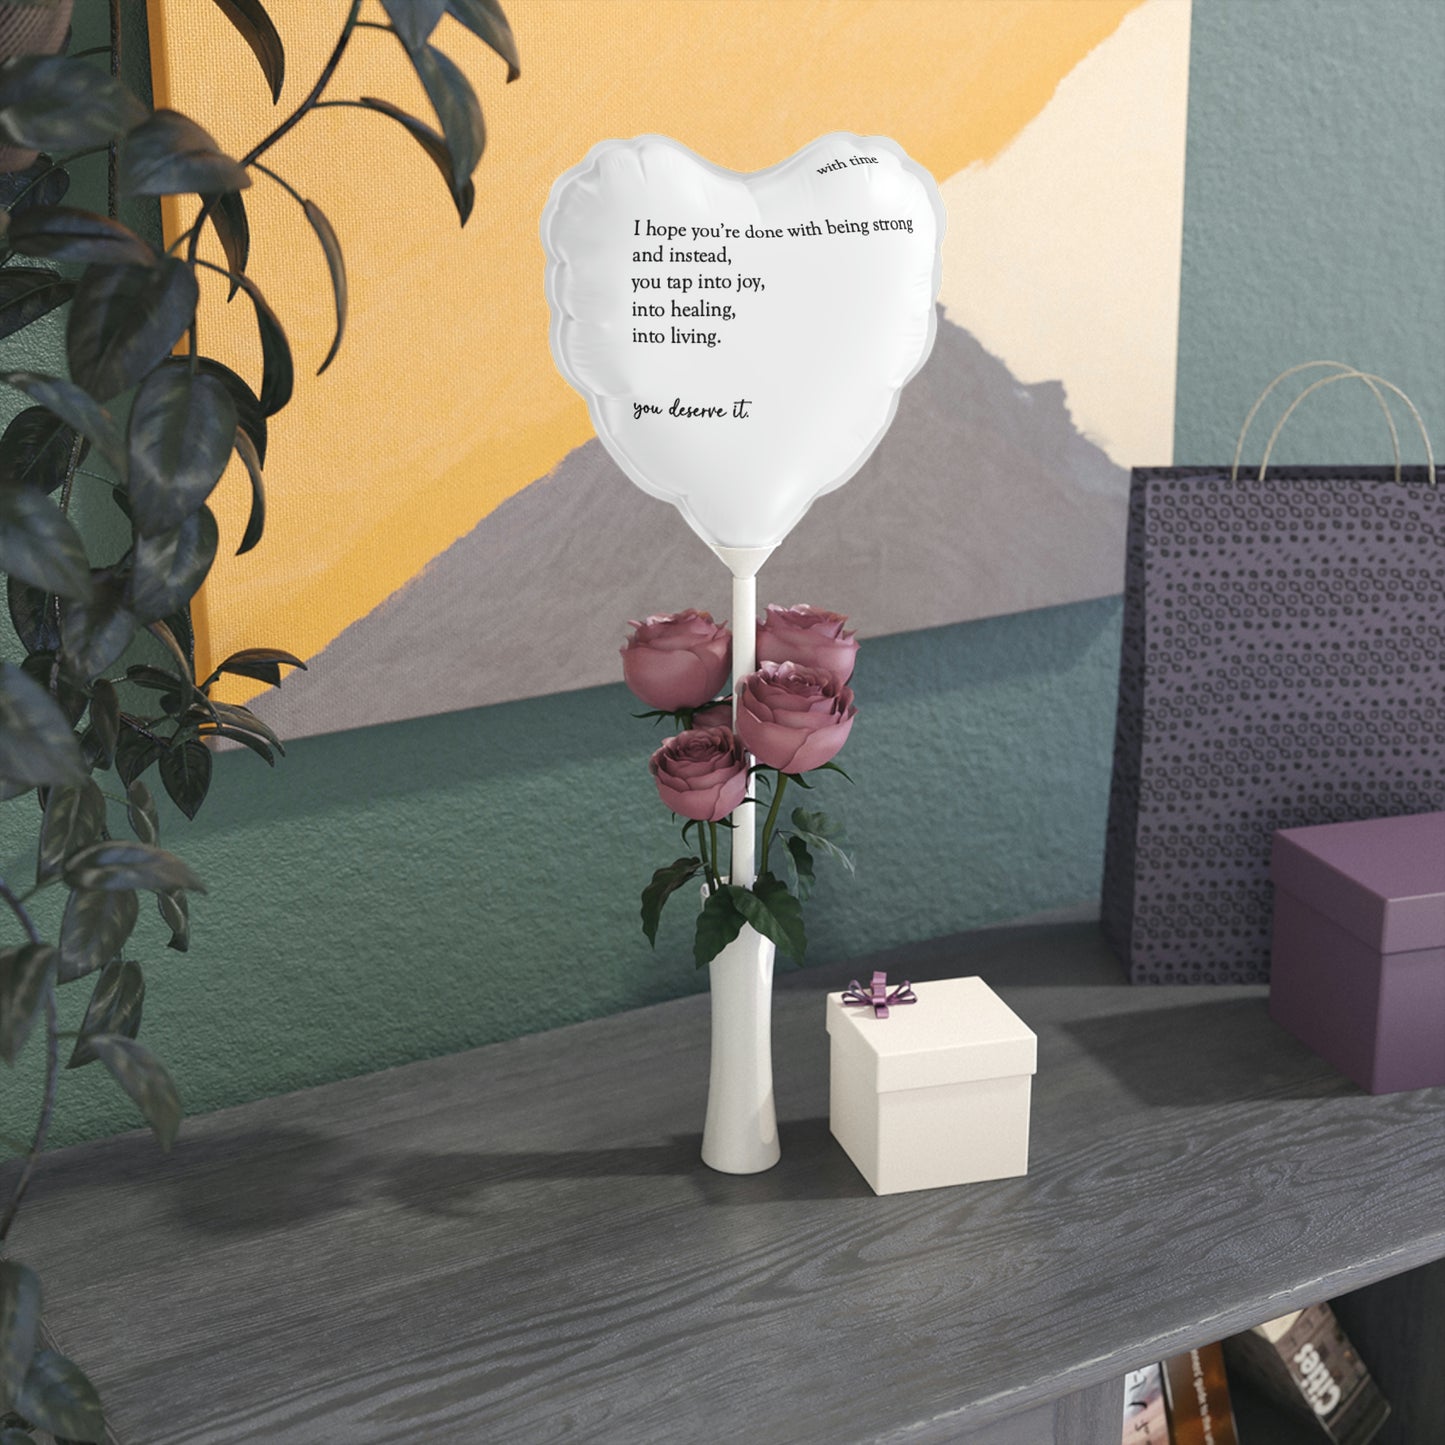 "It Gets Better/You Deserve It" Balloons (Heart-shaped), 6"